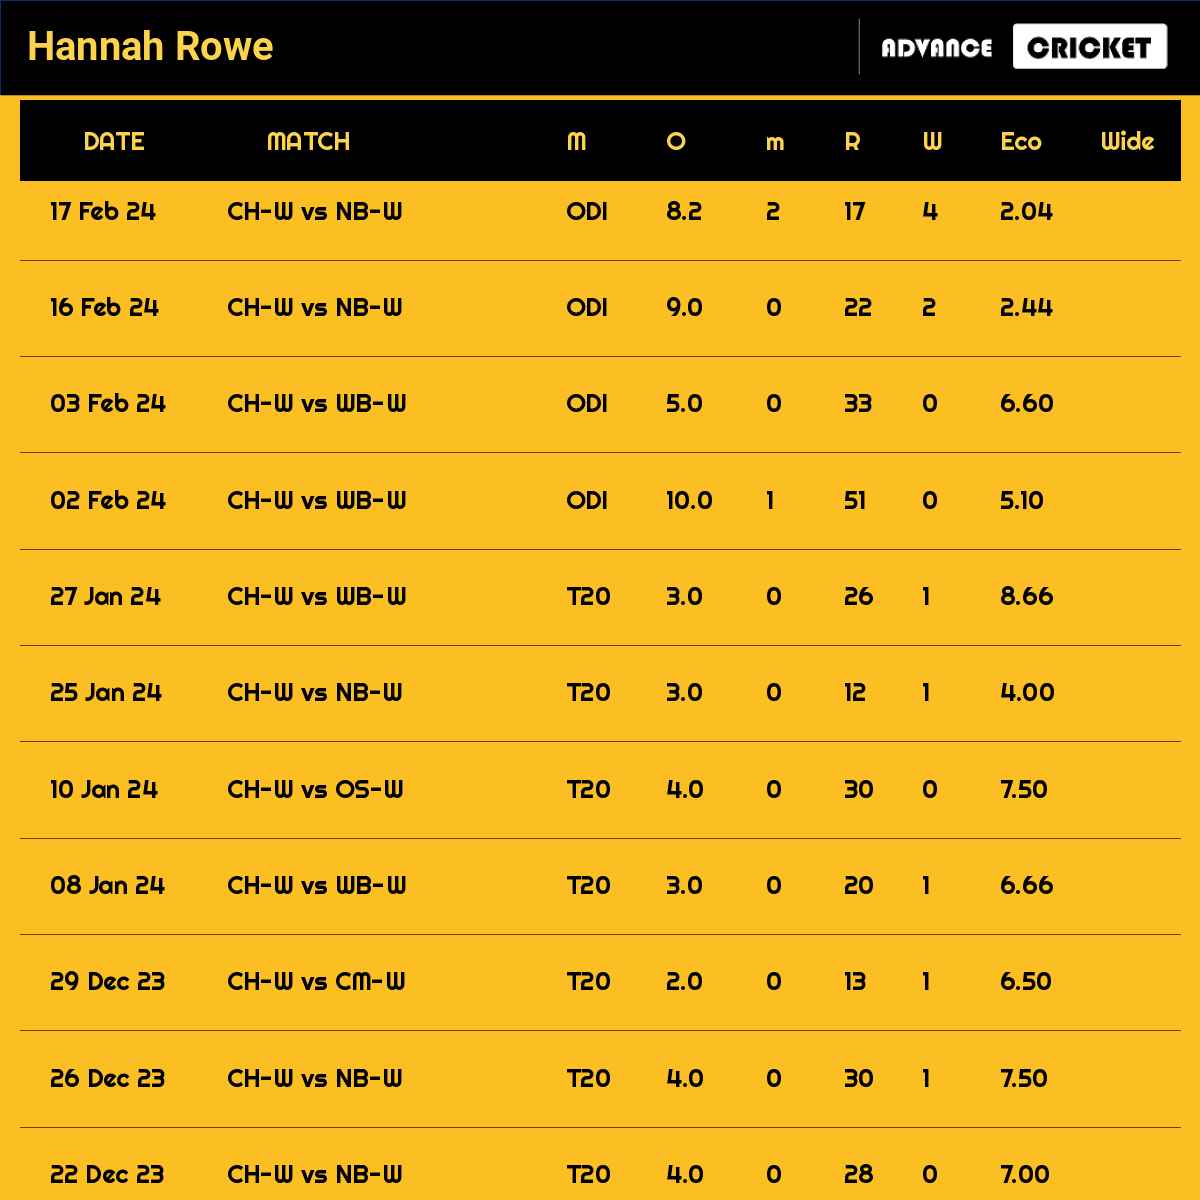 Hannah Rowe recent matches